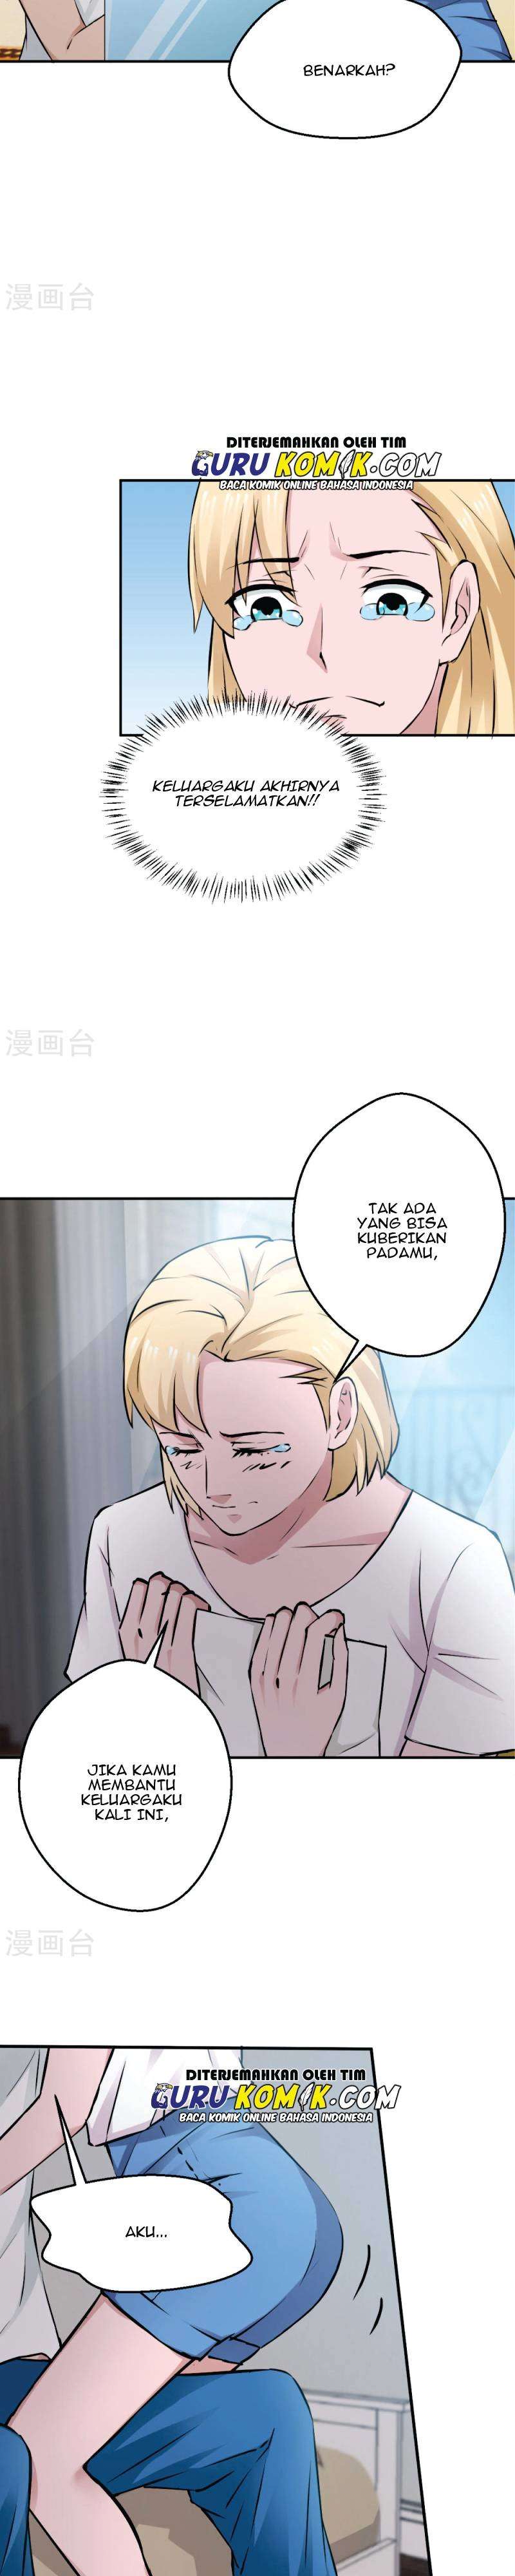 Close Mad Doctor Chapter 57 – 64 END